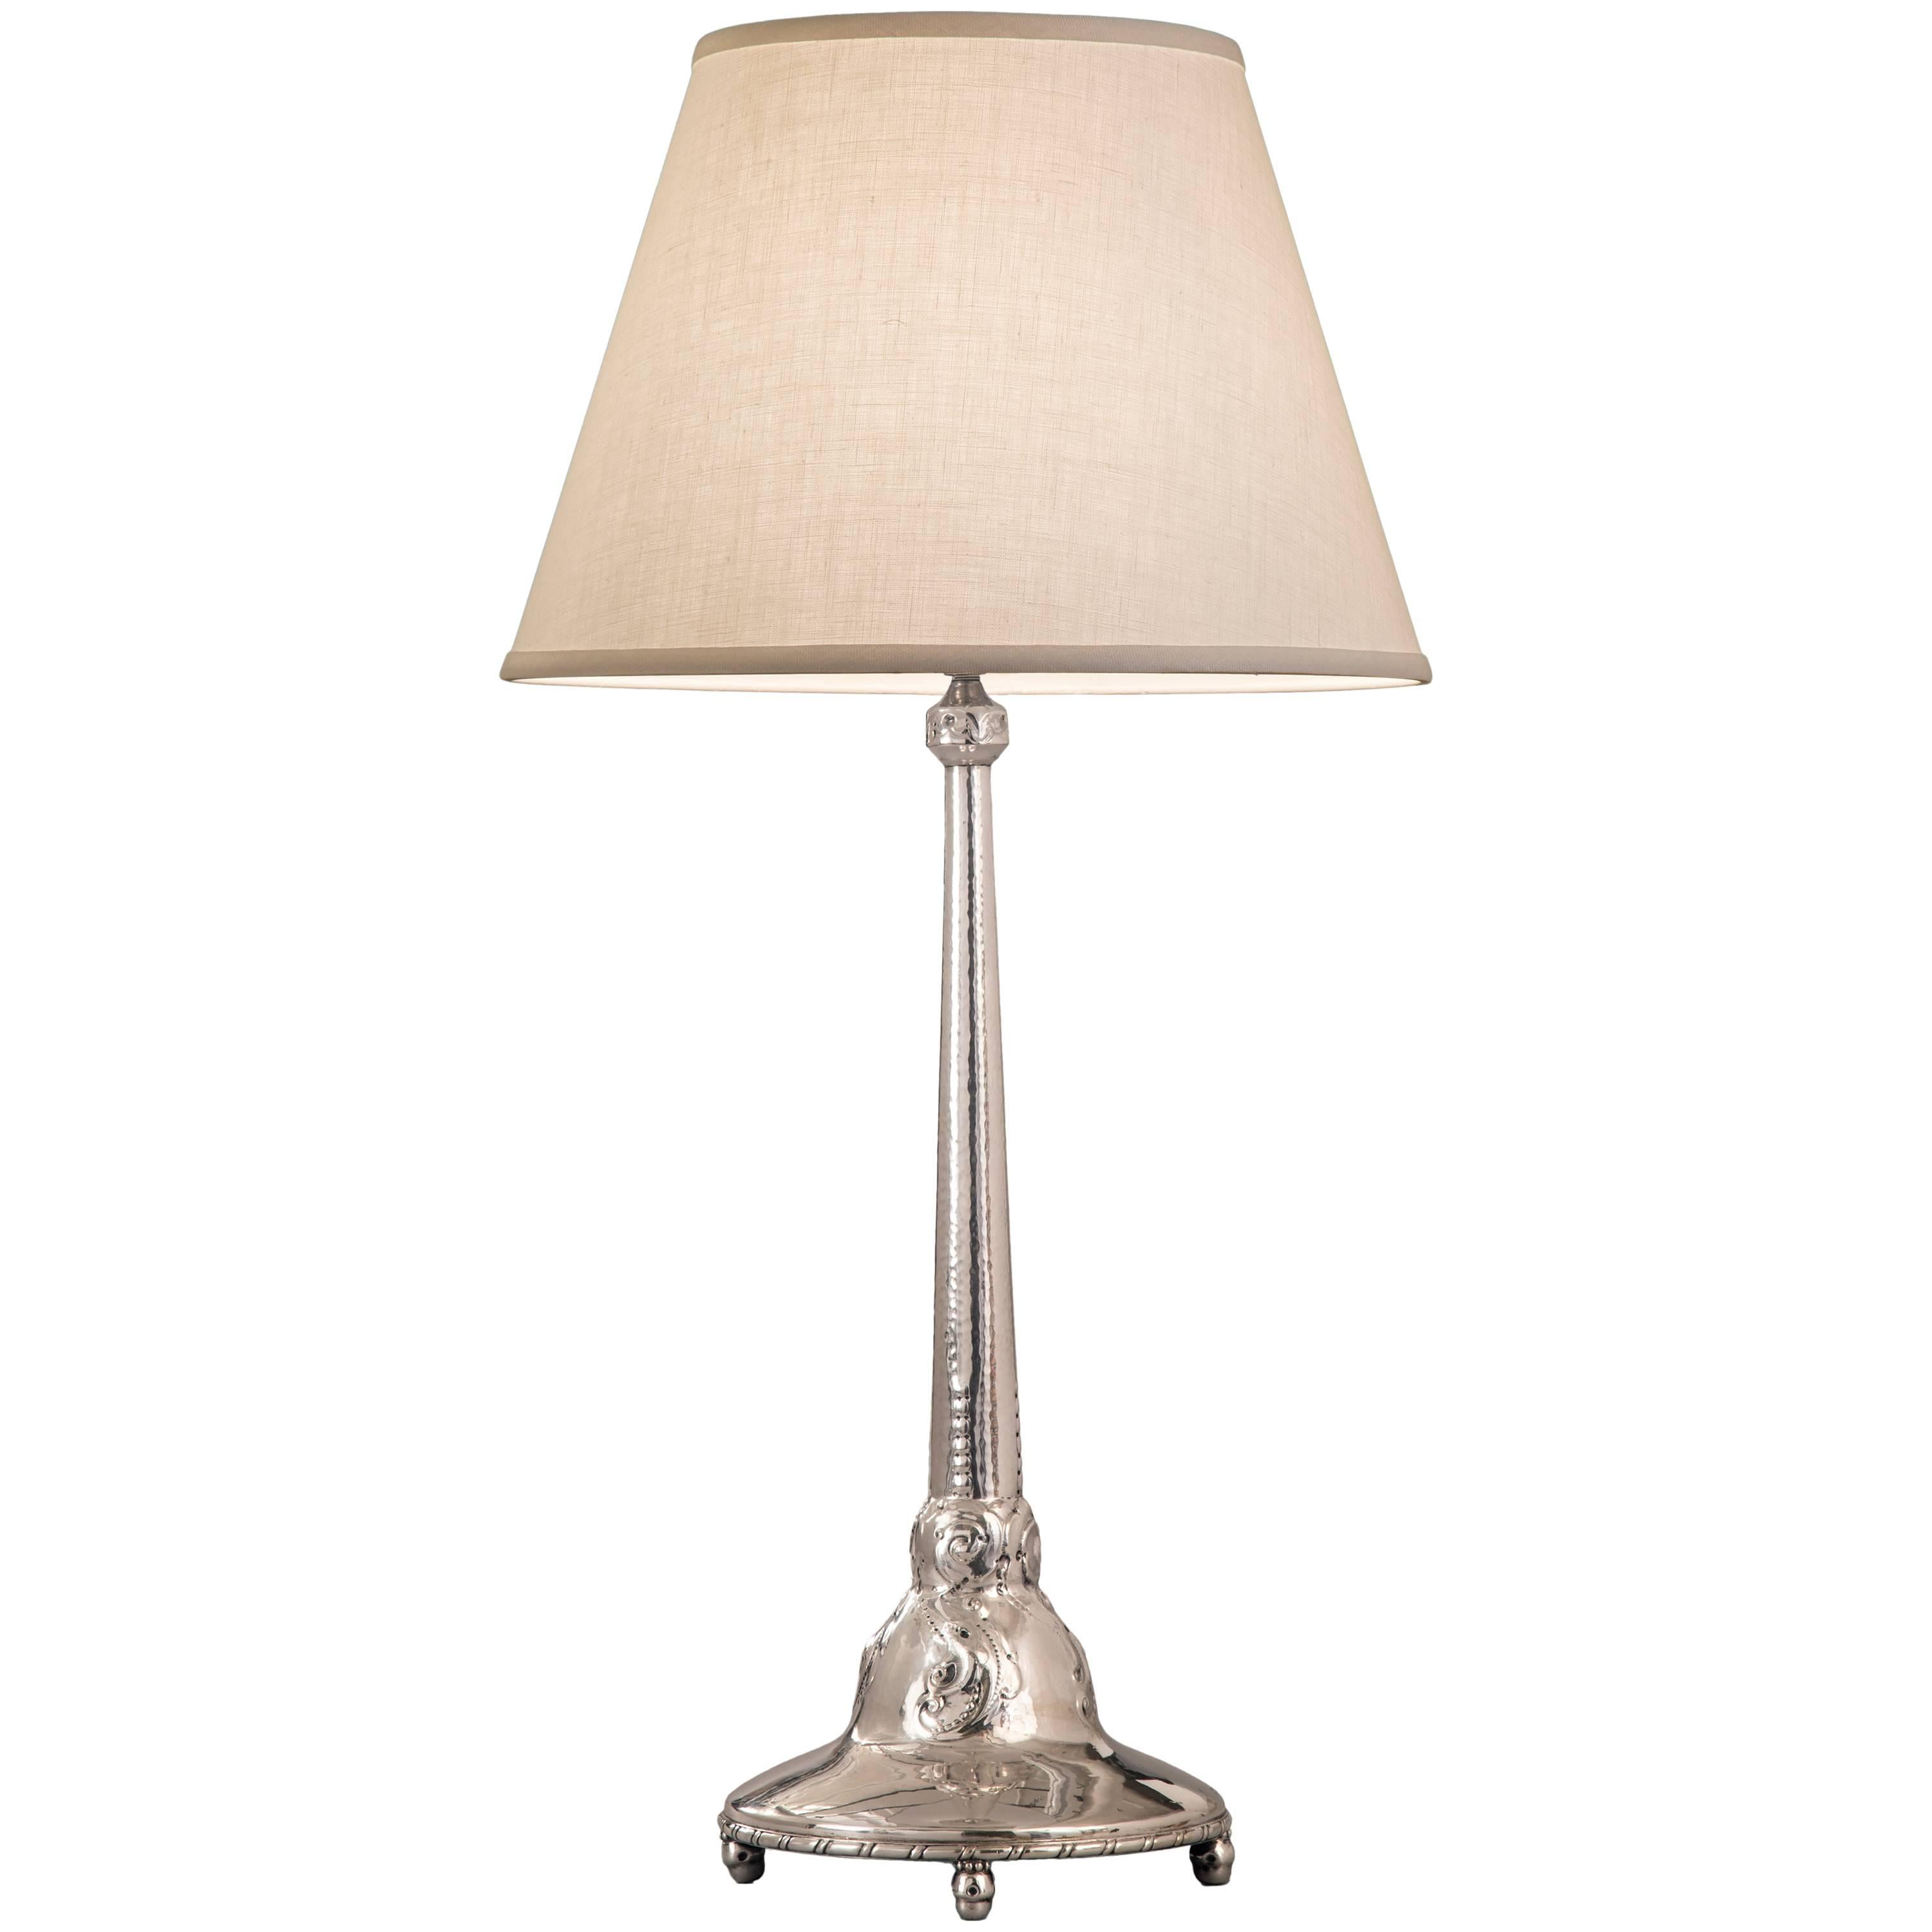 Karl Anderson, Swedish Grace Period Hammered Silver Table Lamp